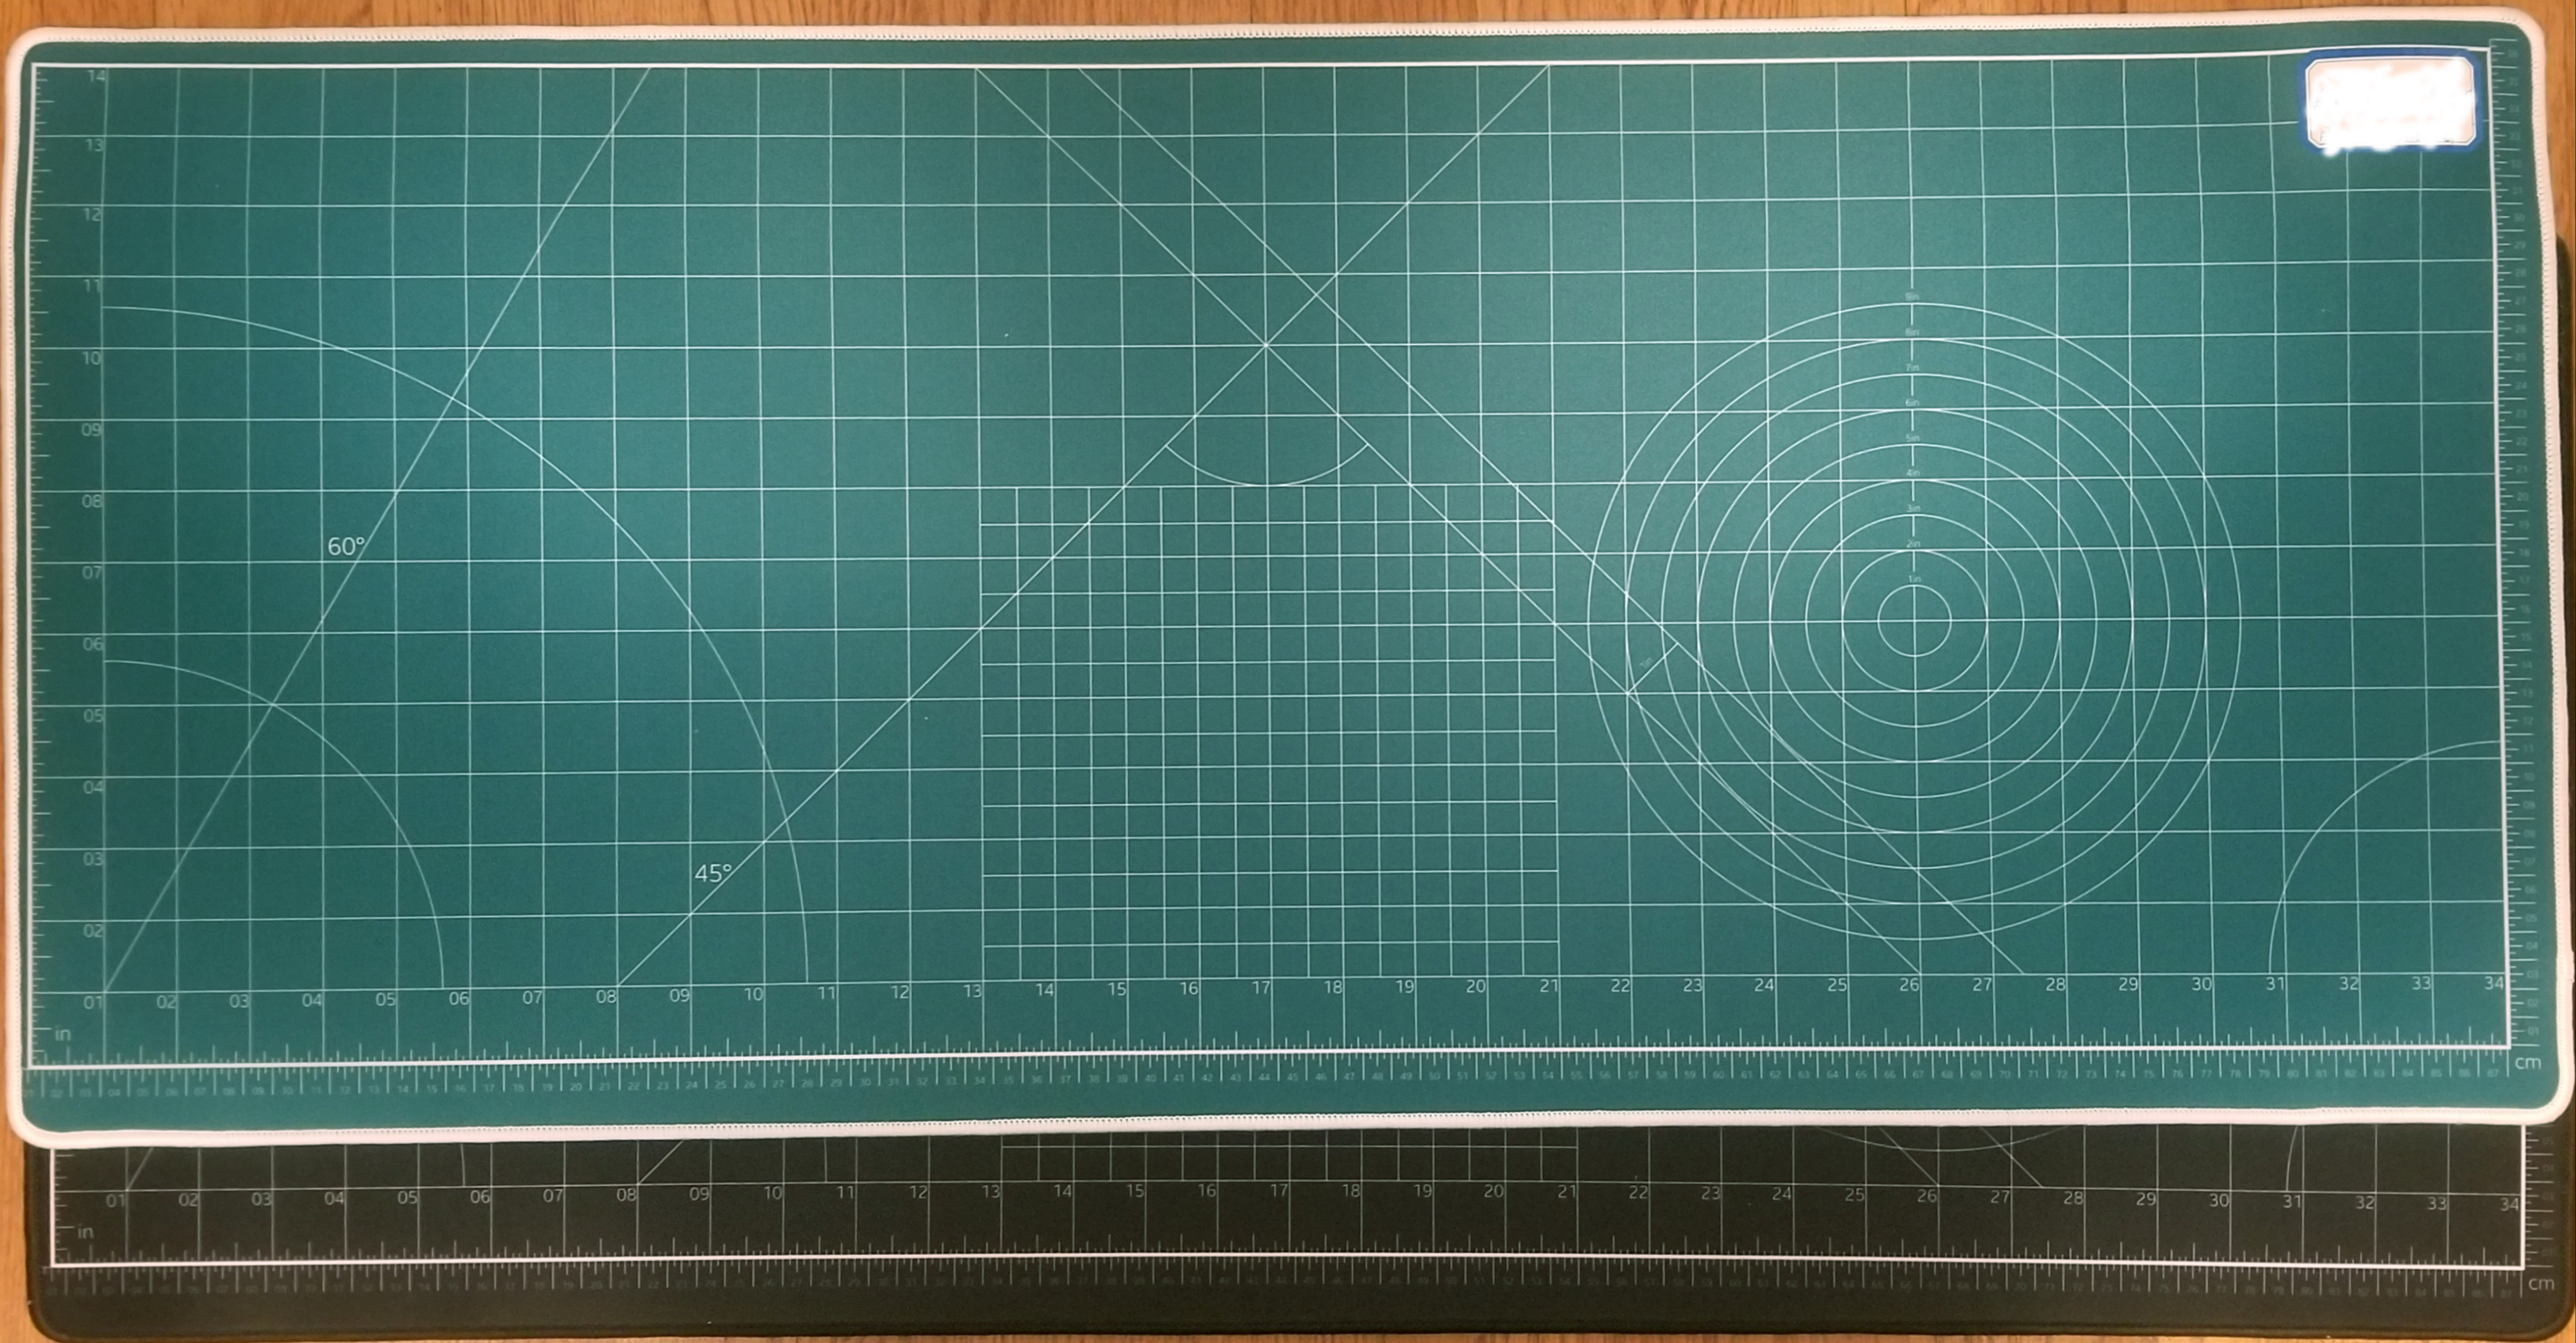 IC] Hobby mat themed desk pad (with accurate measurements)